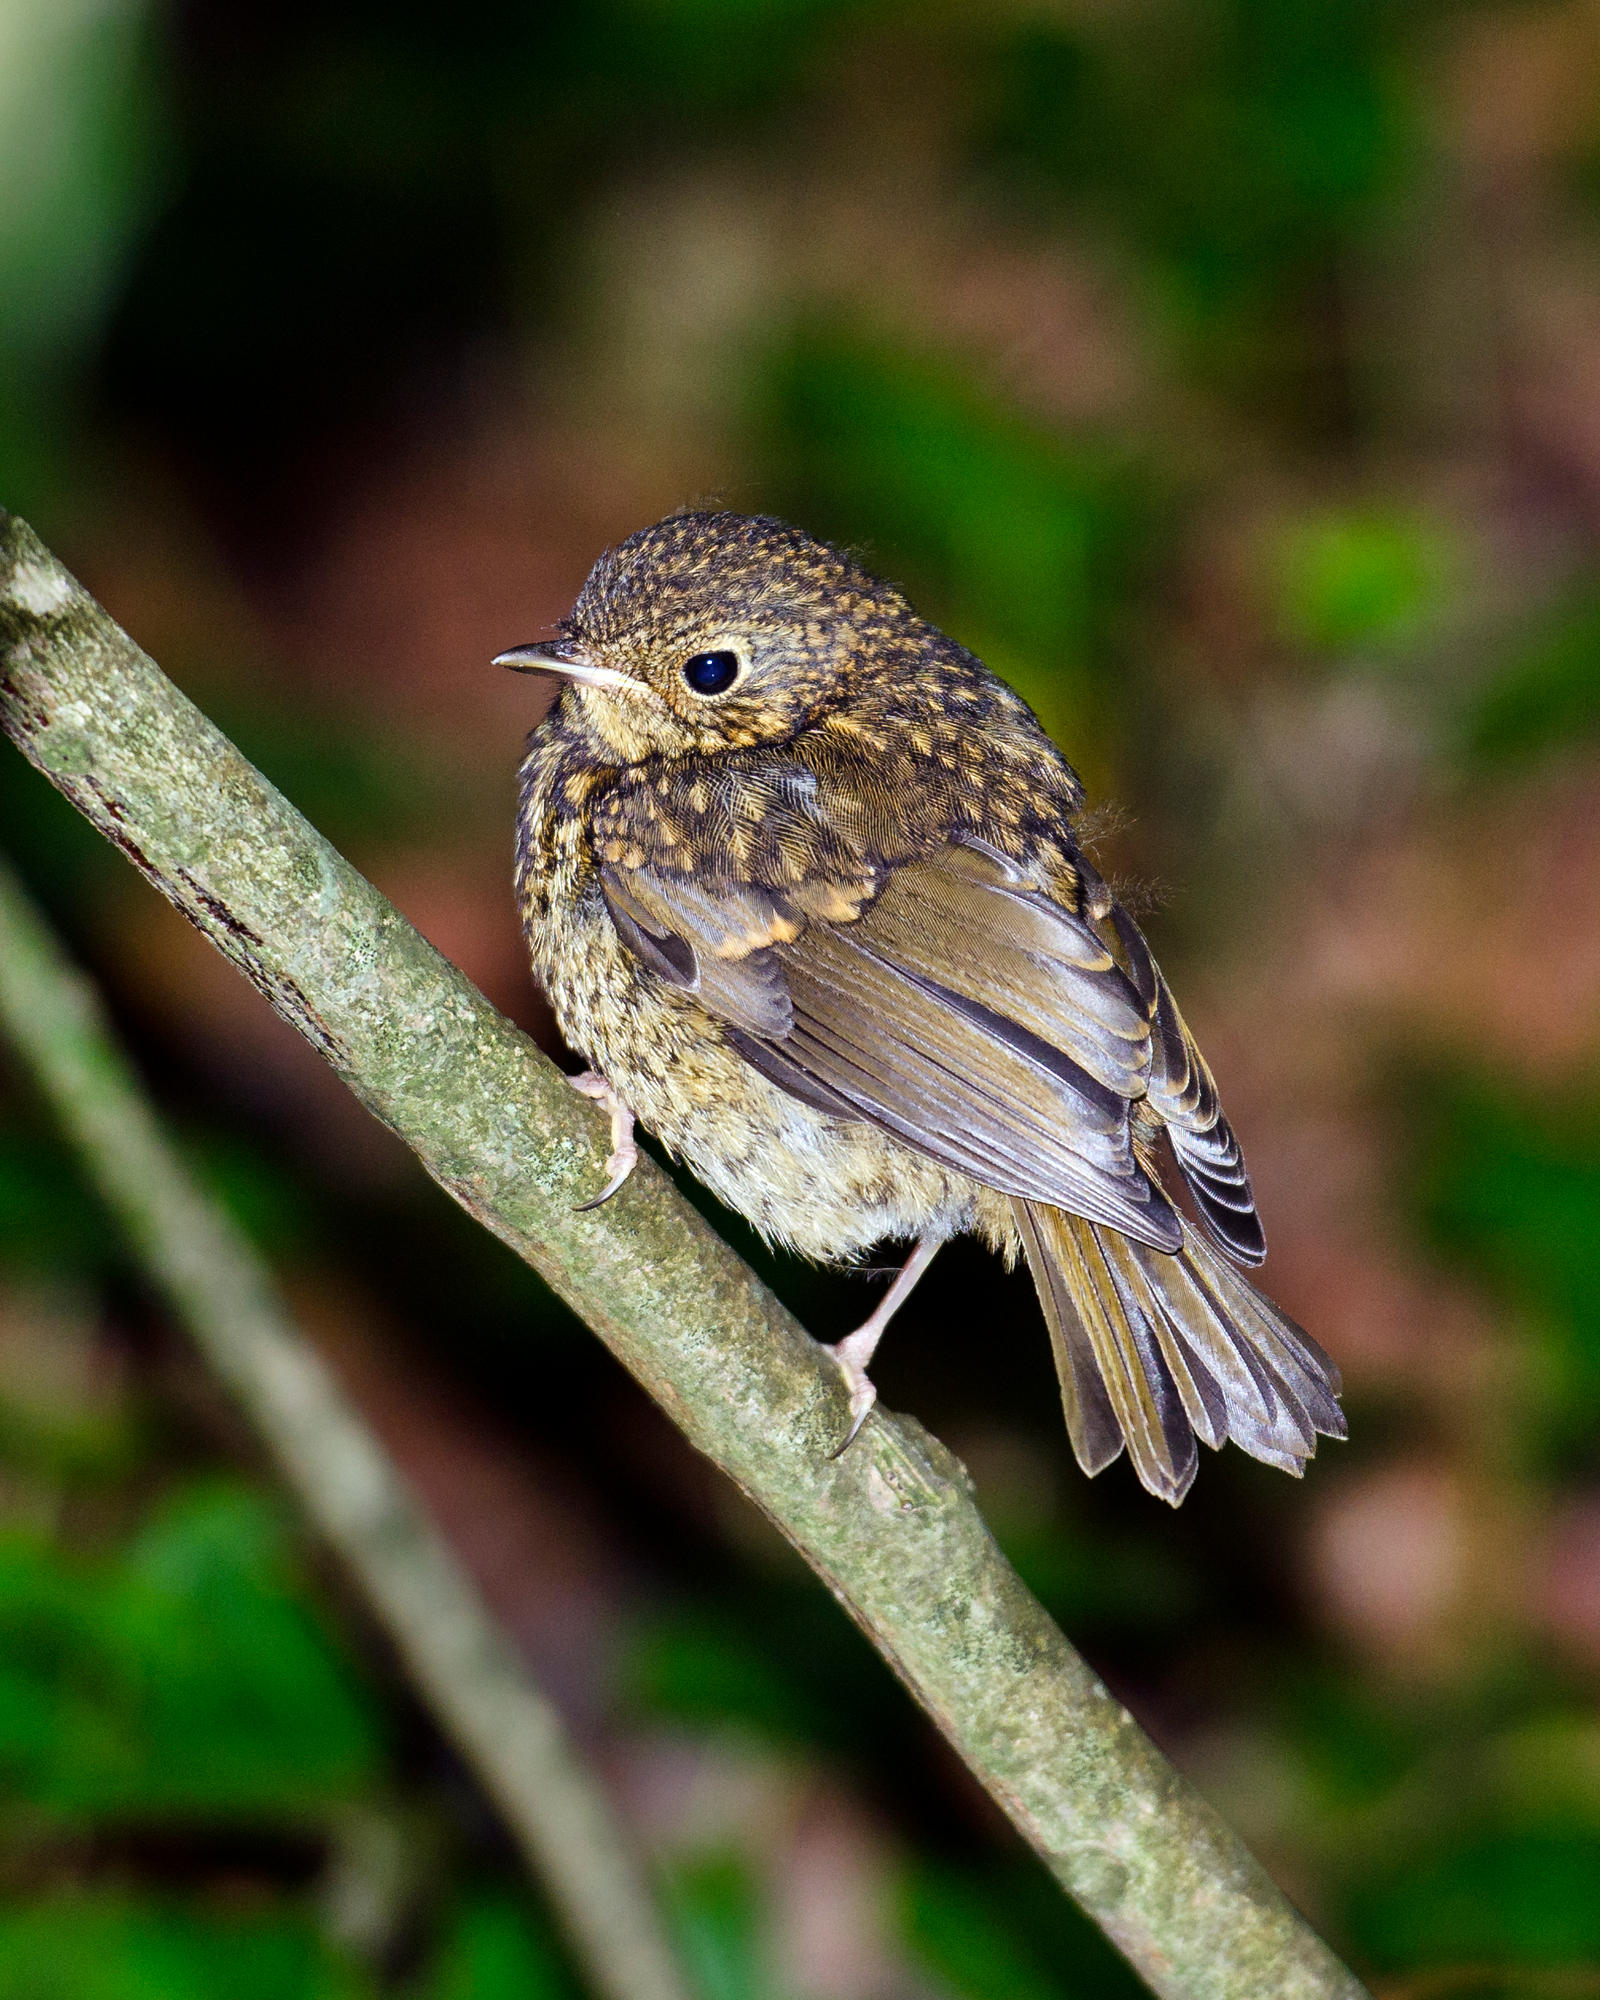 Another Juvenile Robin